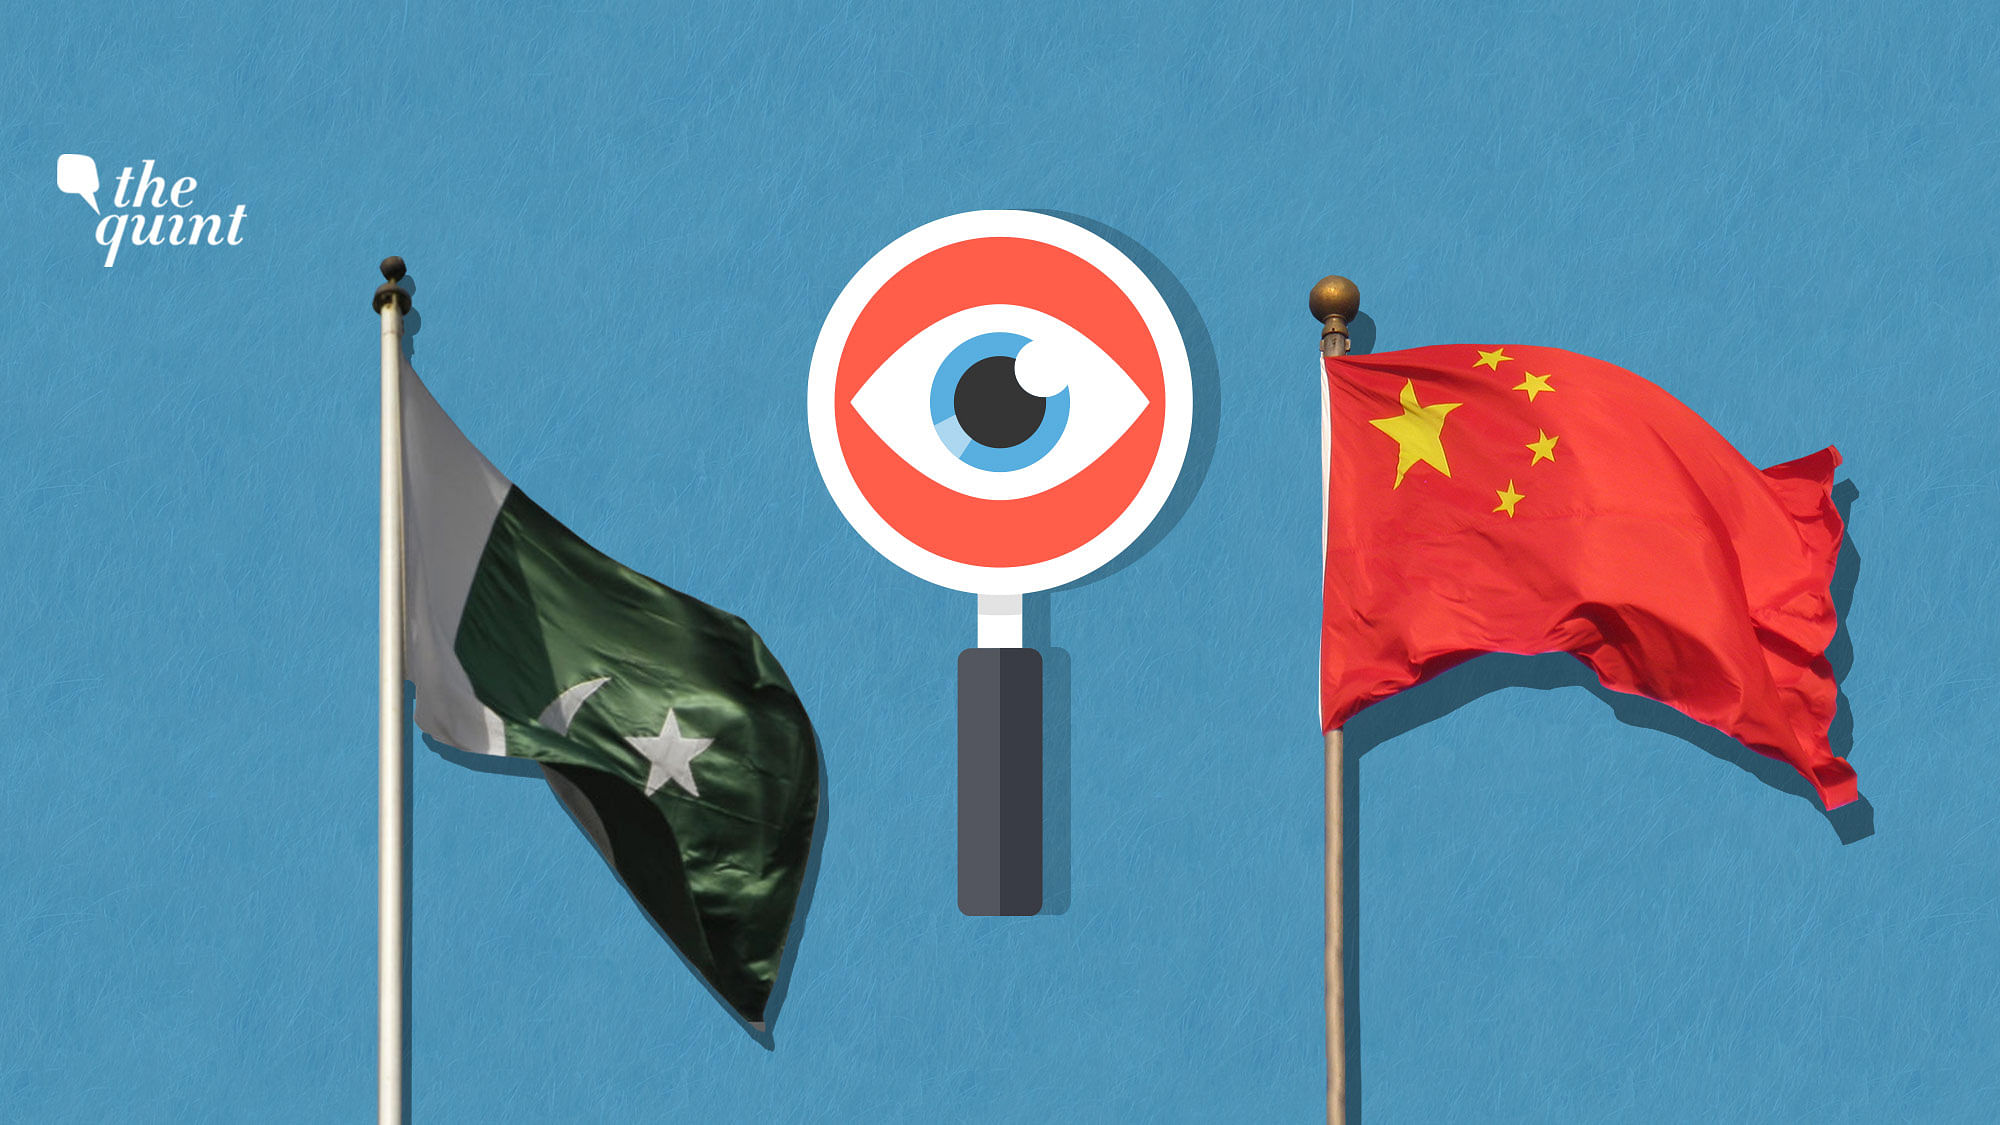 Image of Chinese and Pakistani flags used for representational purposes.